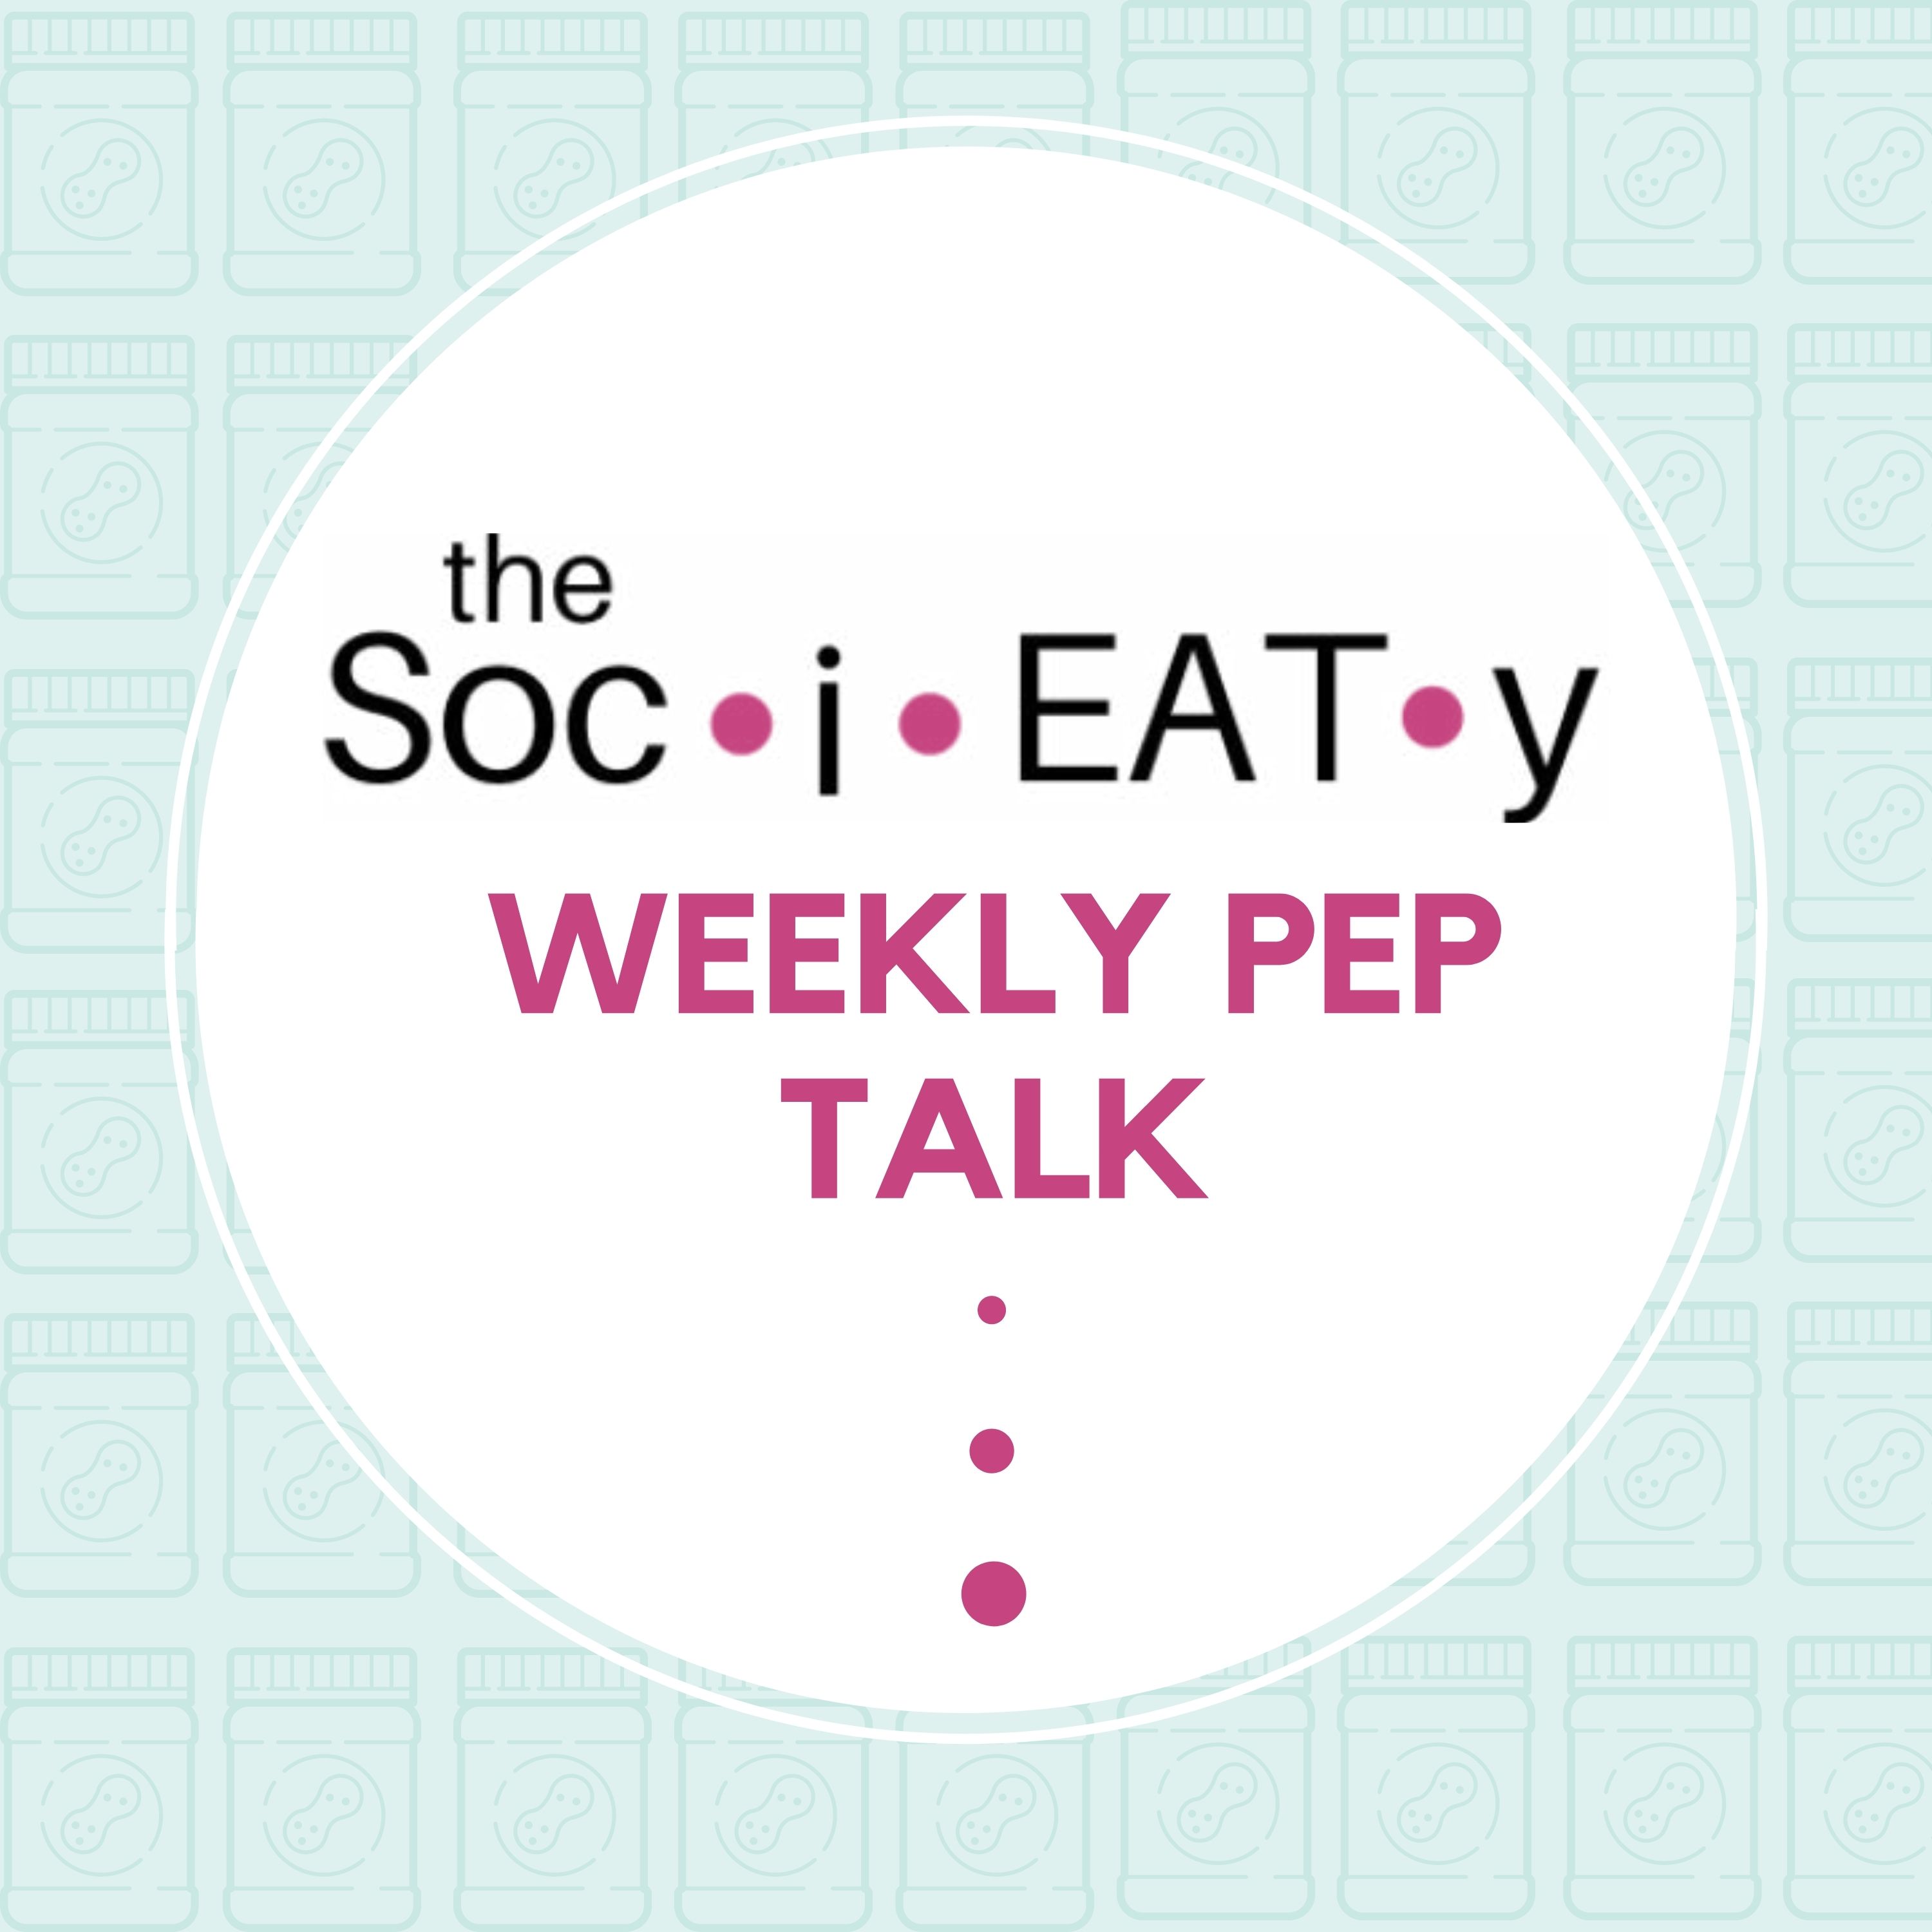 53. March 18 Weekly Pep Talk